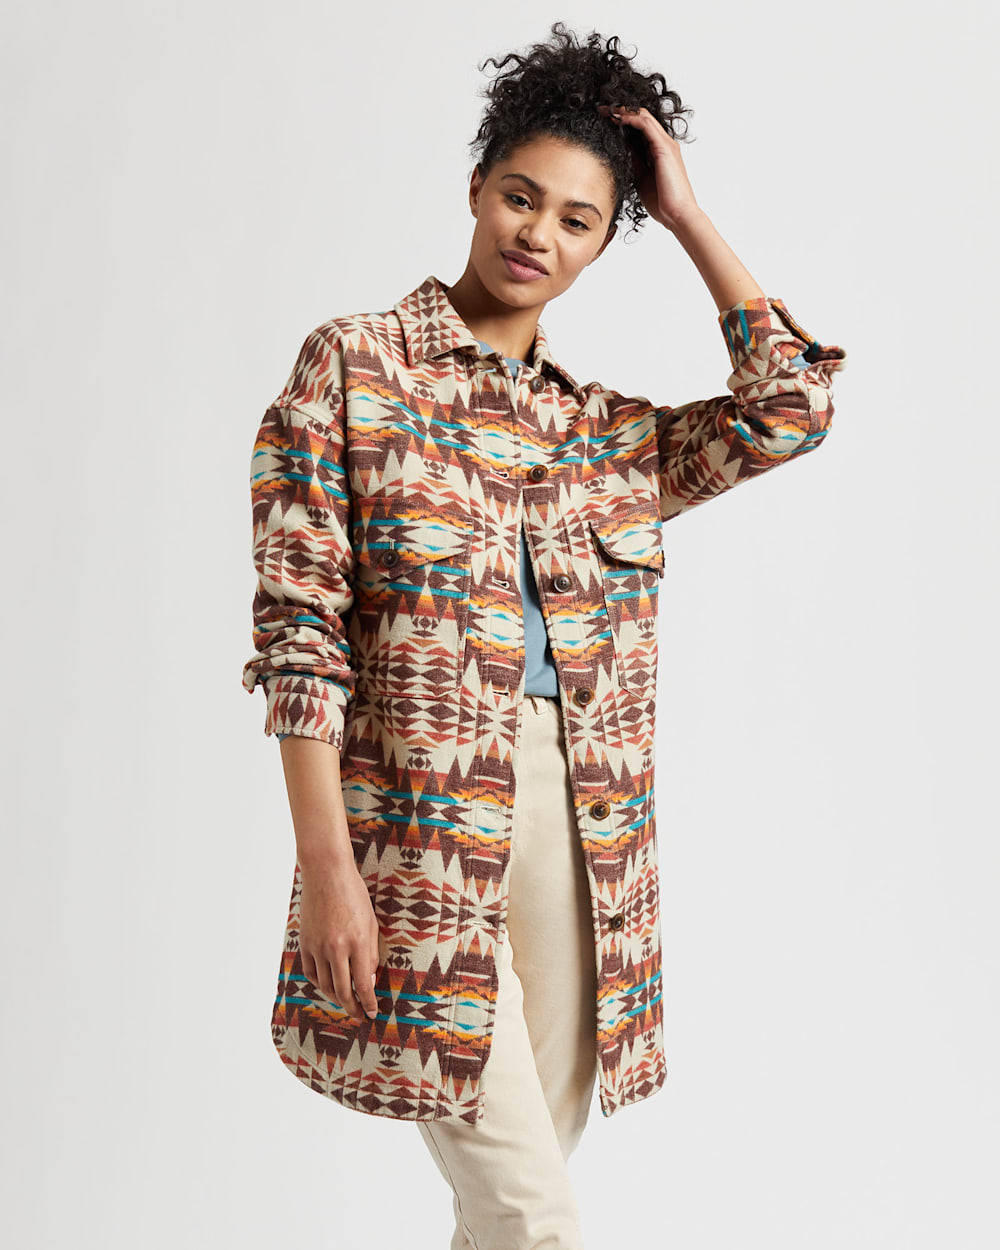 ALTERNATE VIEW OF WOMEN'S OVERSIZED DOUBLESOFT SHIRT JACKET IN WARM SAND MULTI image number 6